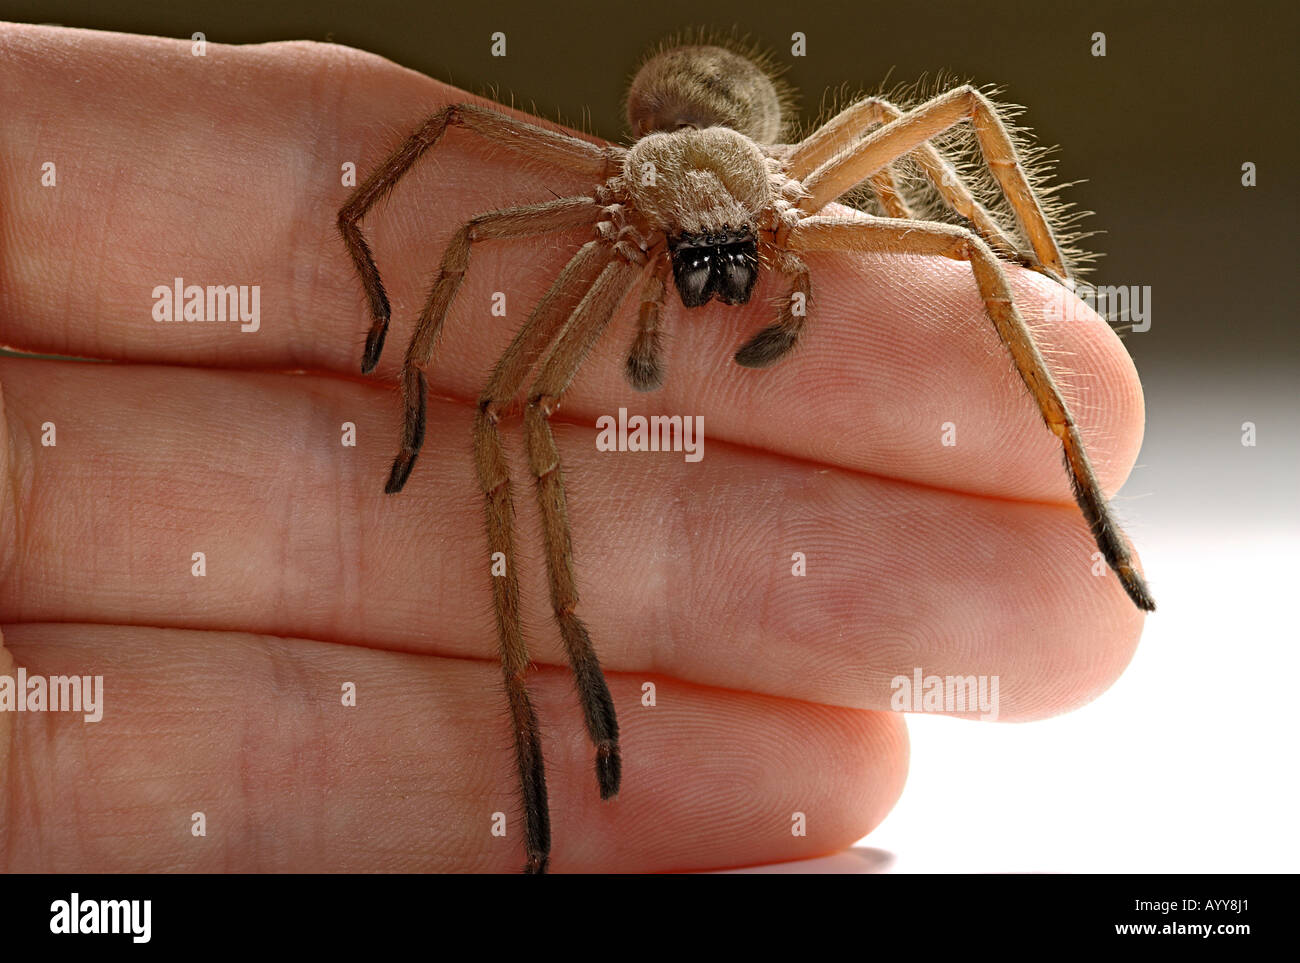 spider on a hand Stock Photo